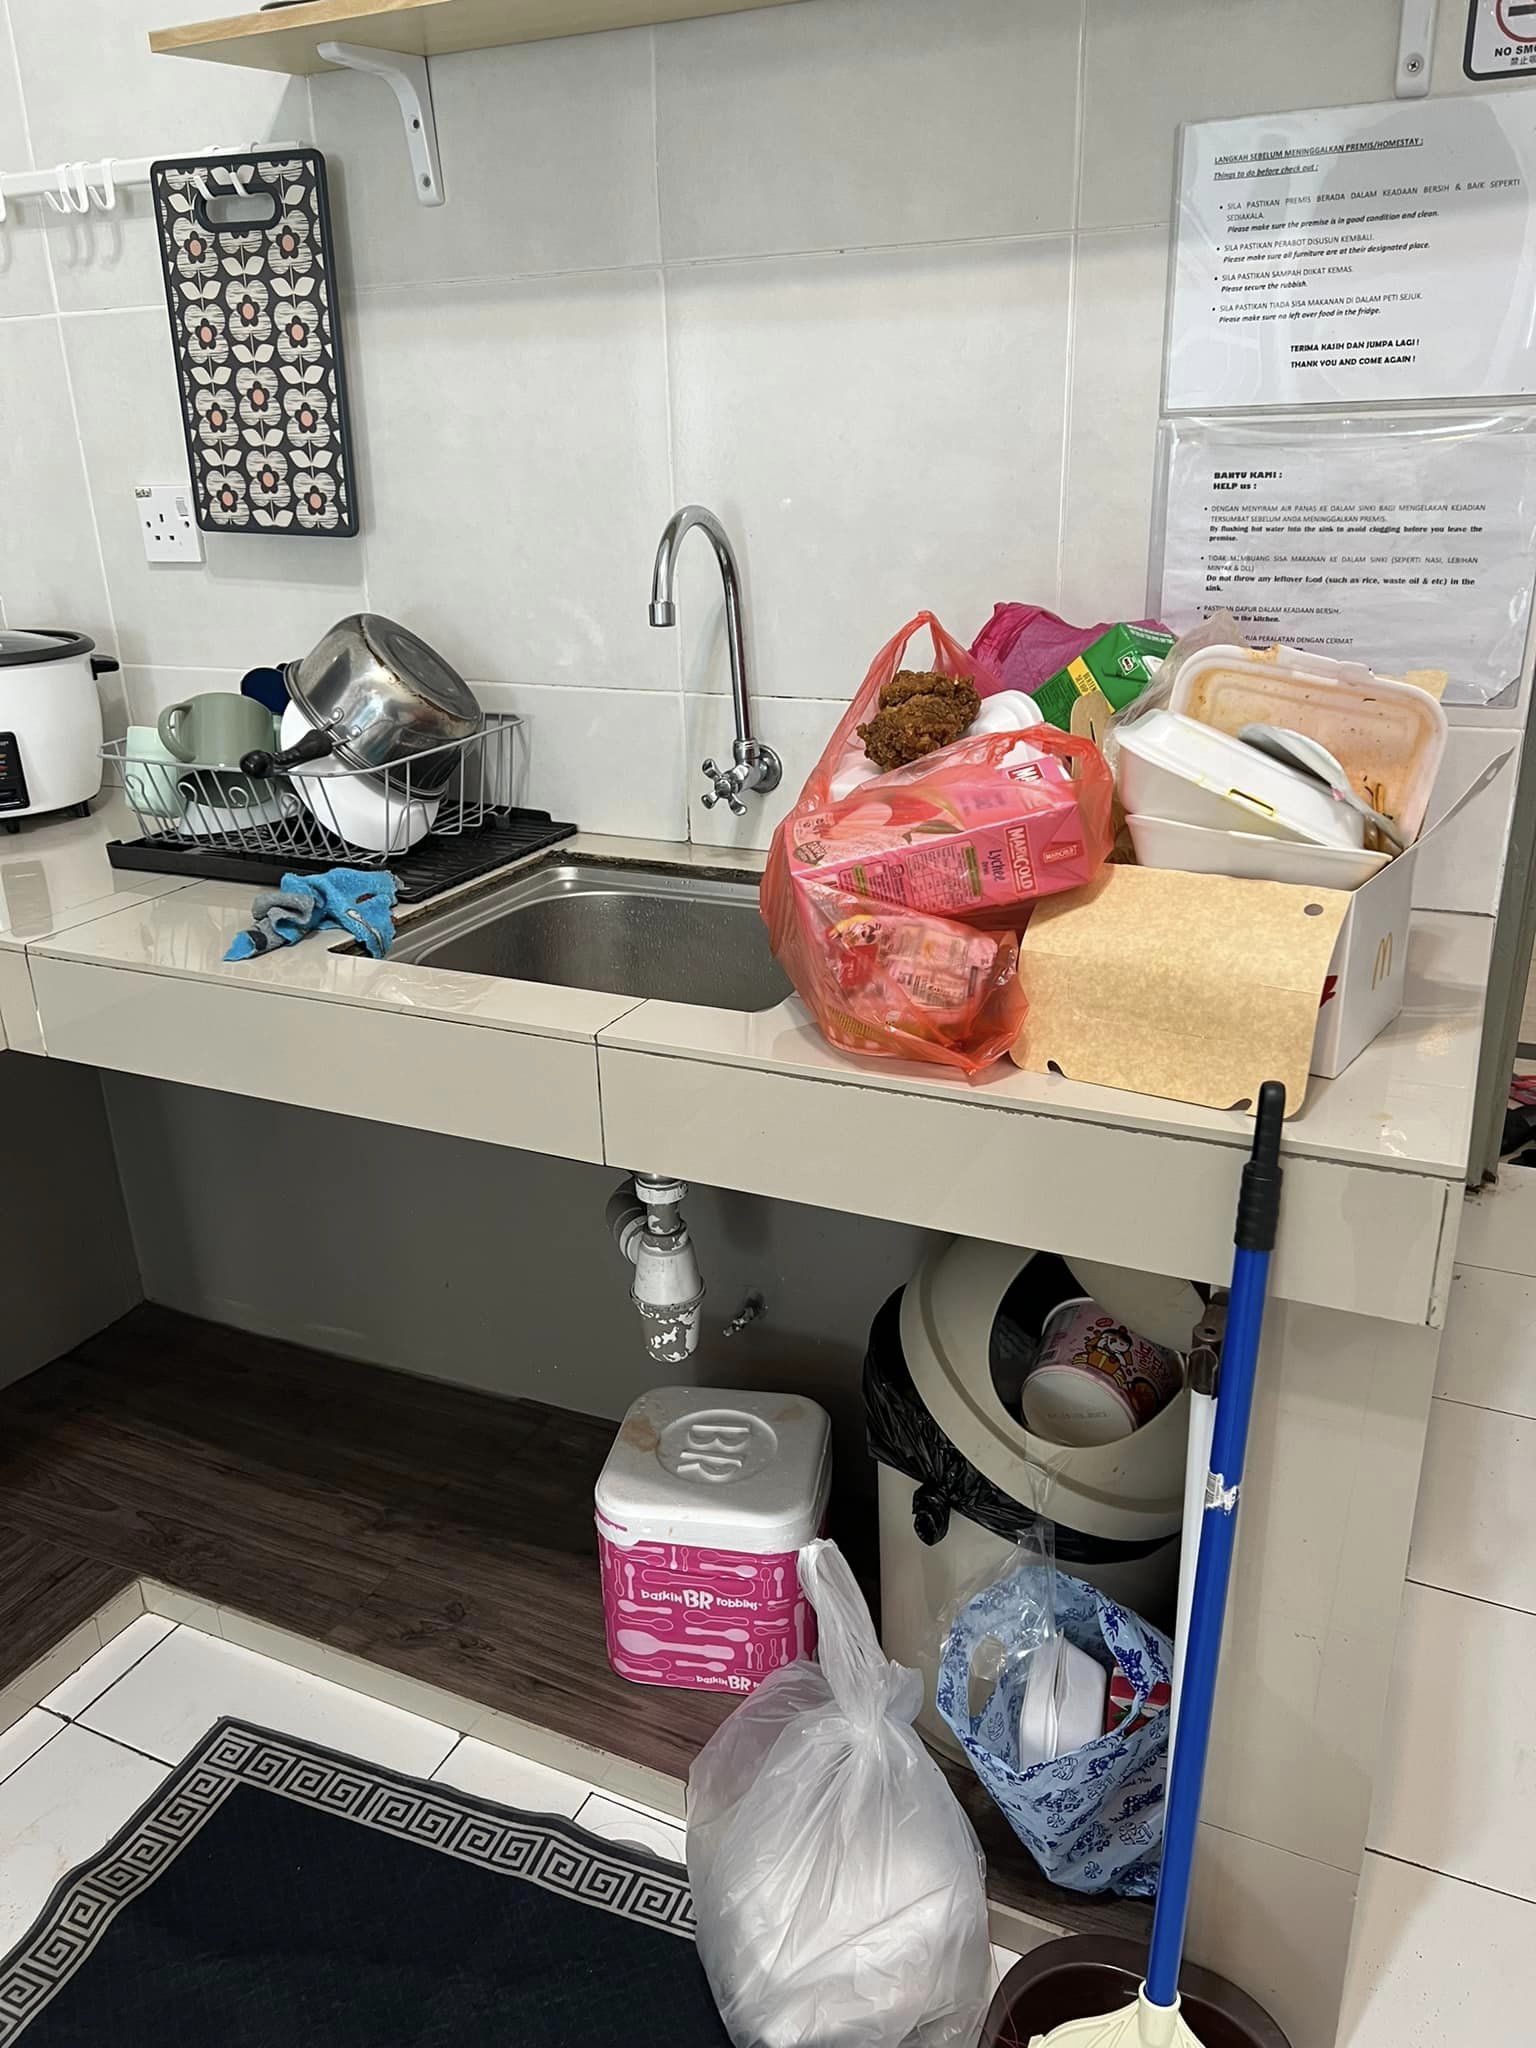 The tenants heaped rubbish onto the countertop of the kitchen in the homestay. Image credit: Nur Izzati Nadia